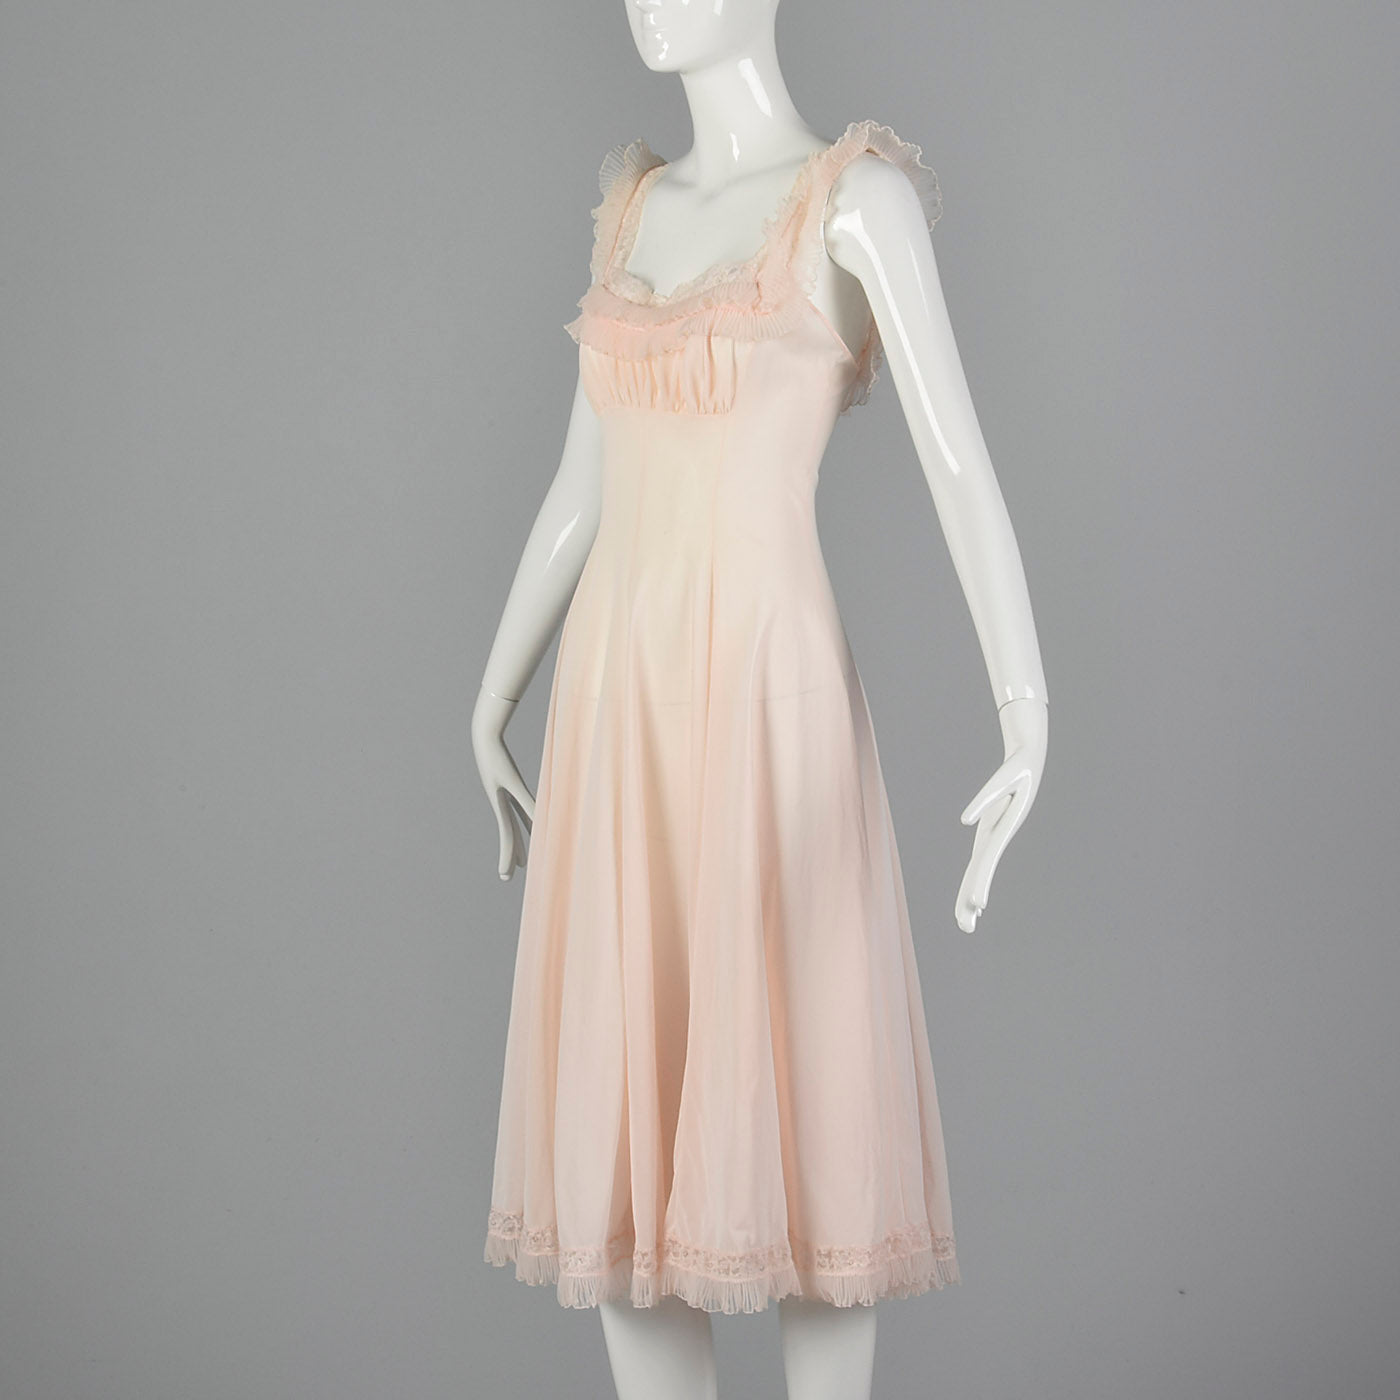 1950s Pink Nylon Nightgown with Ruffle Trim